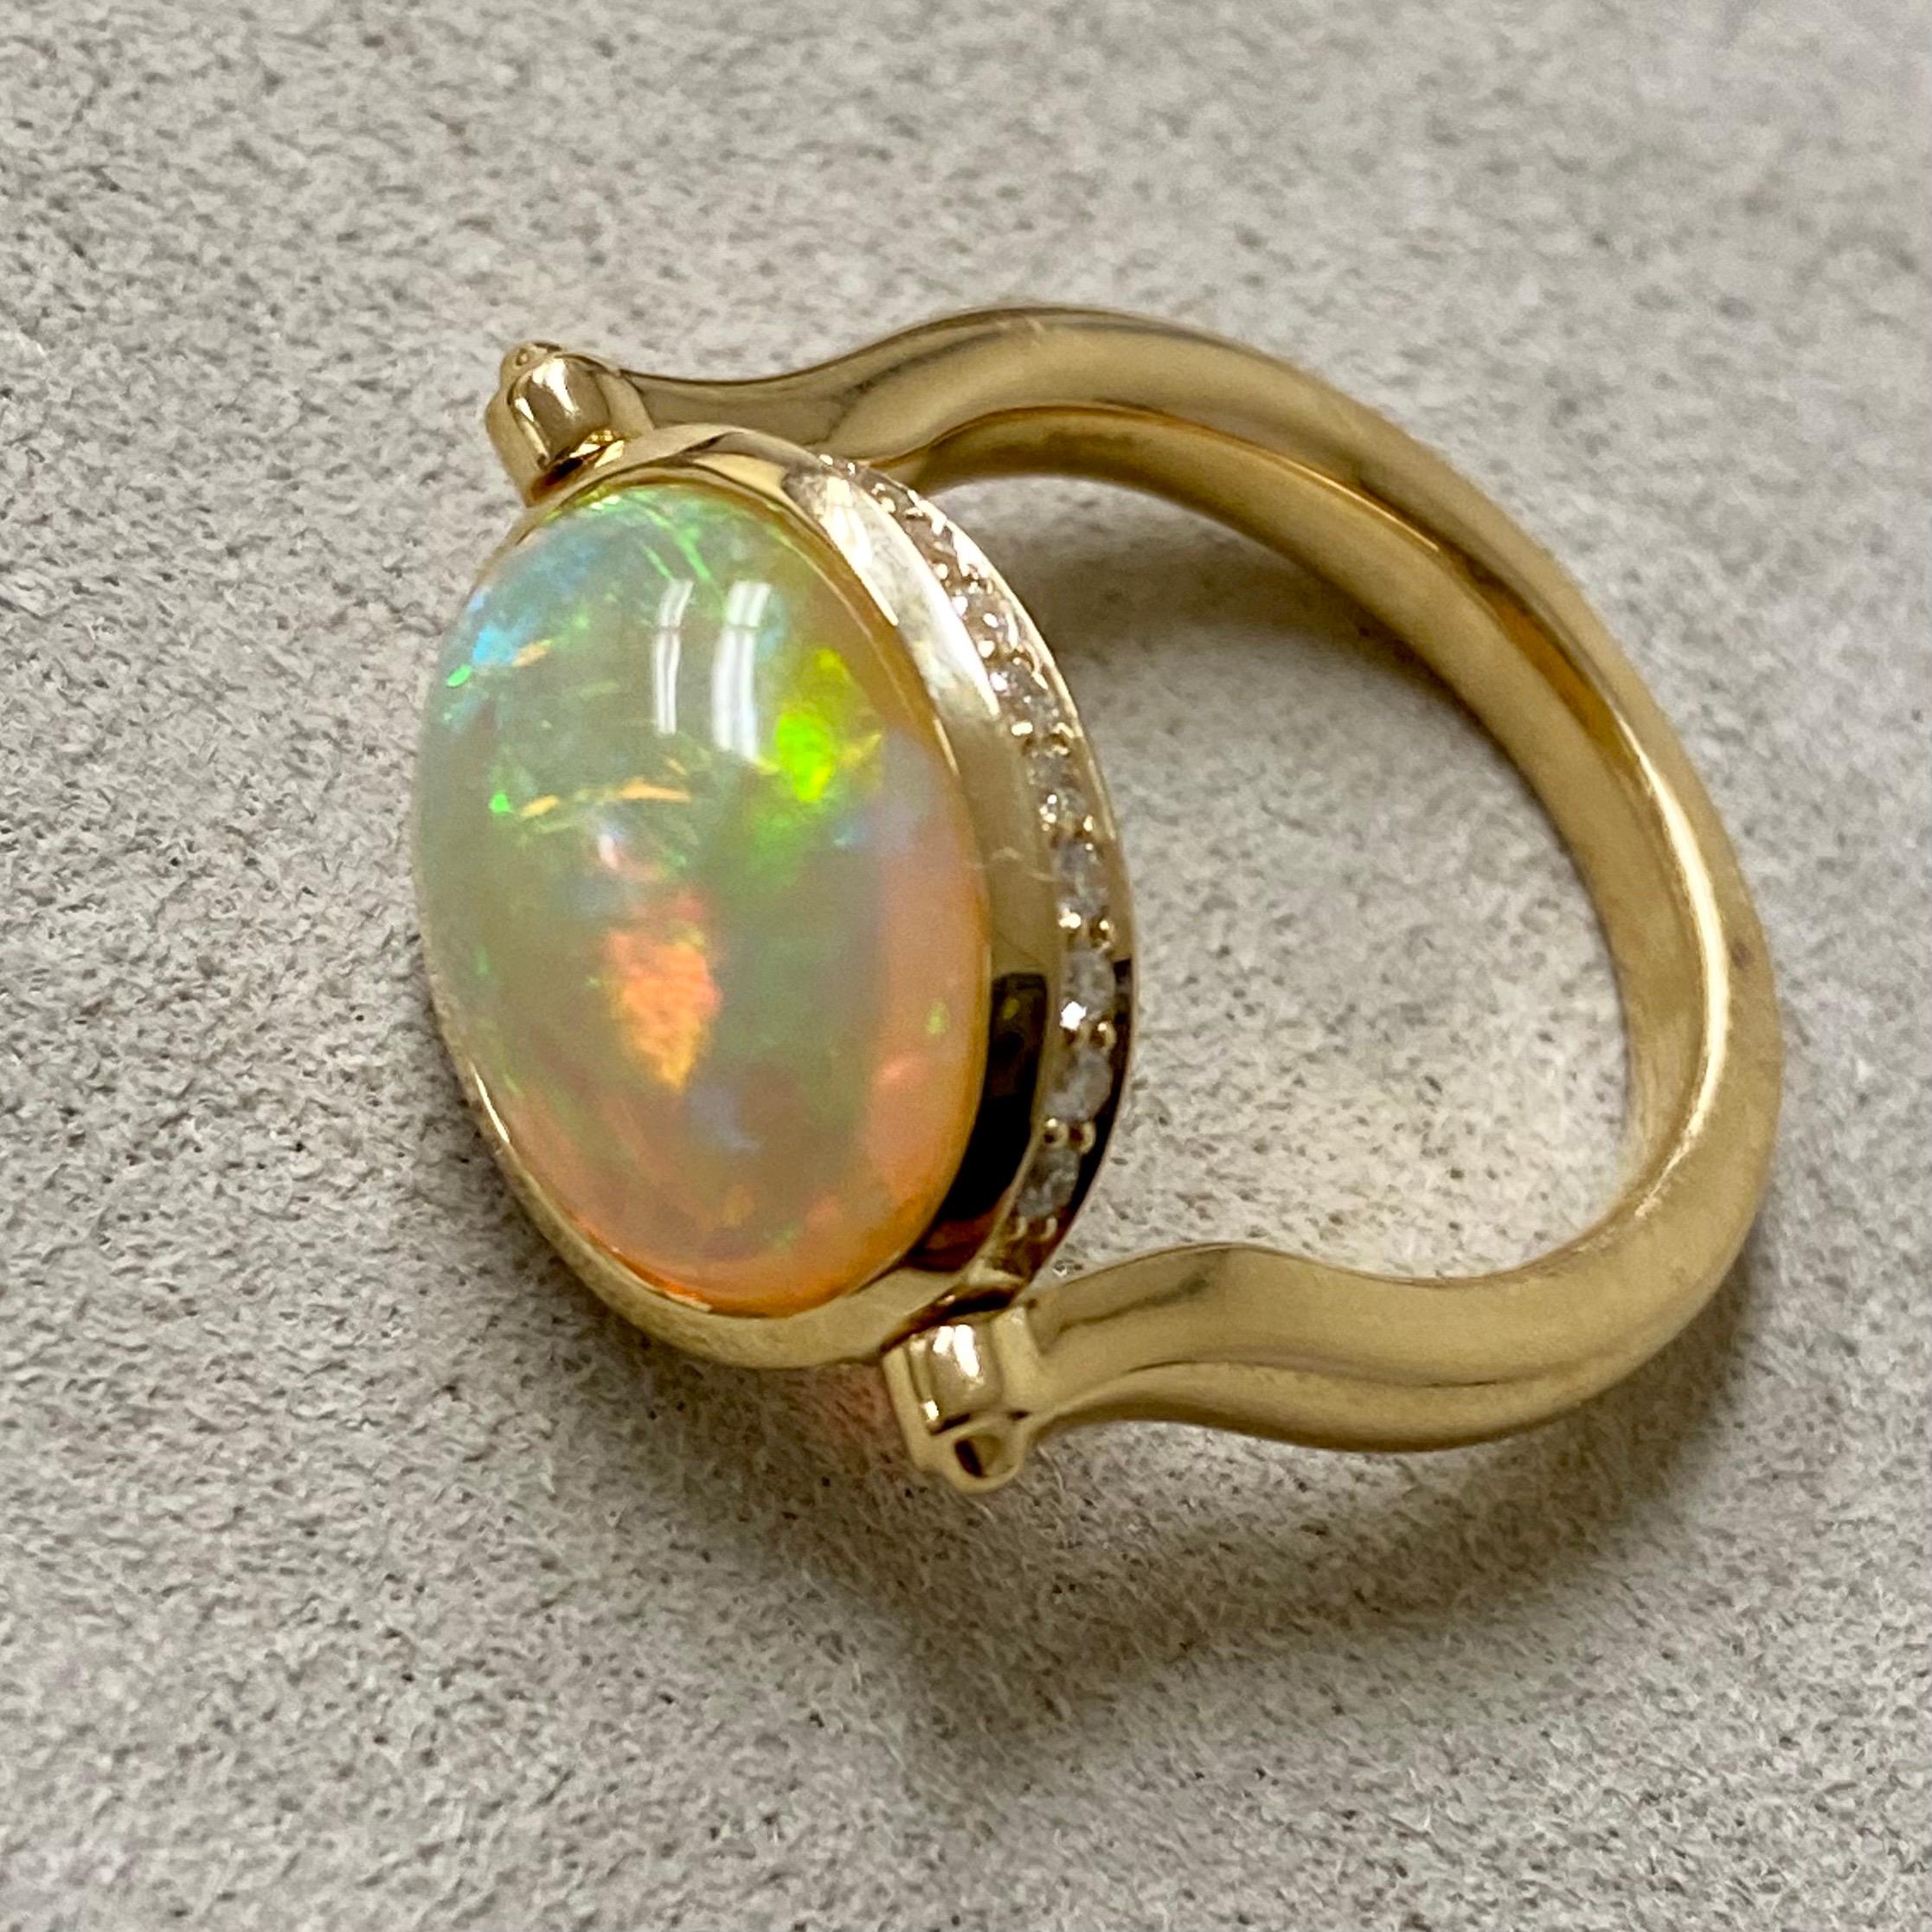 Created in 18 karat yellow gold
Ethiopian Opal 4 carats approx.
Diamonds 0.30 carat approx.
Ring size US 6.5, can be sized as per request
Swivel mechanism
One of a kind

Stunningly crafted in 18 karat yellow gold, this one-of-a-kind ring features an